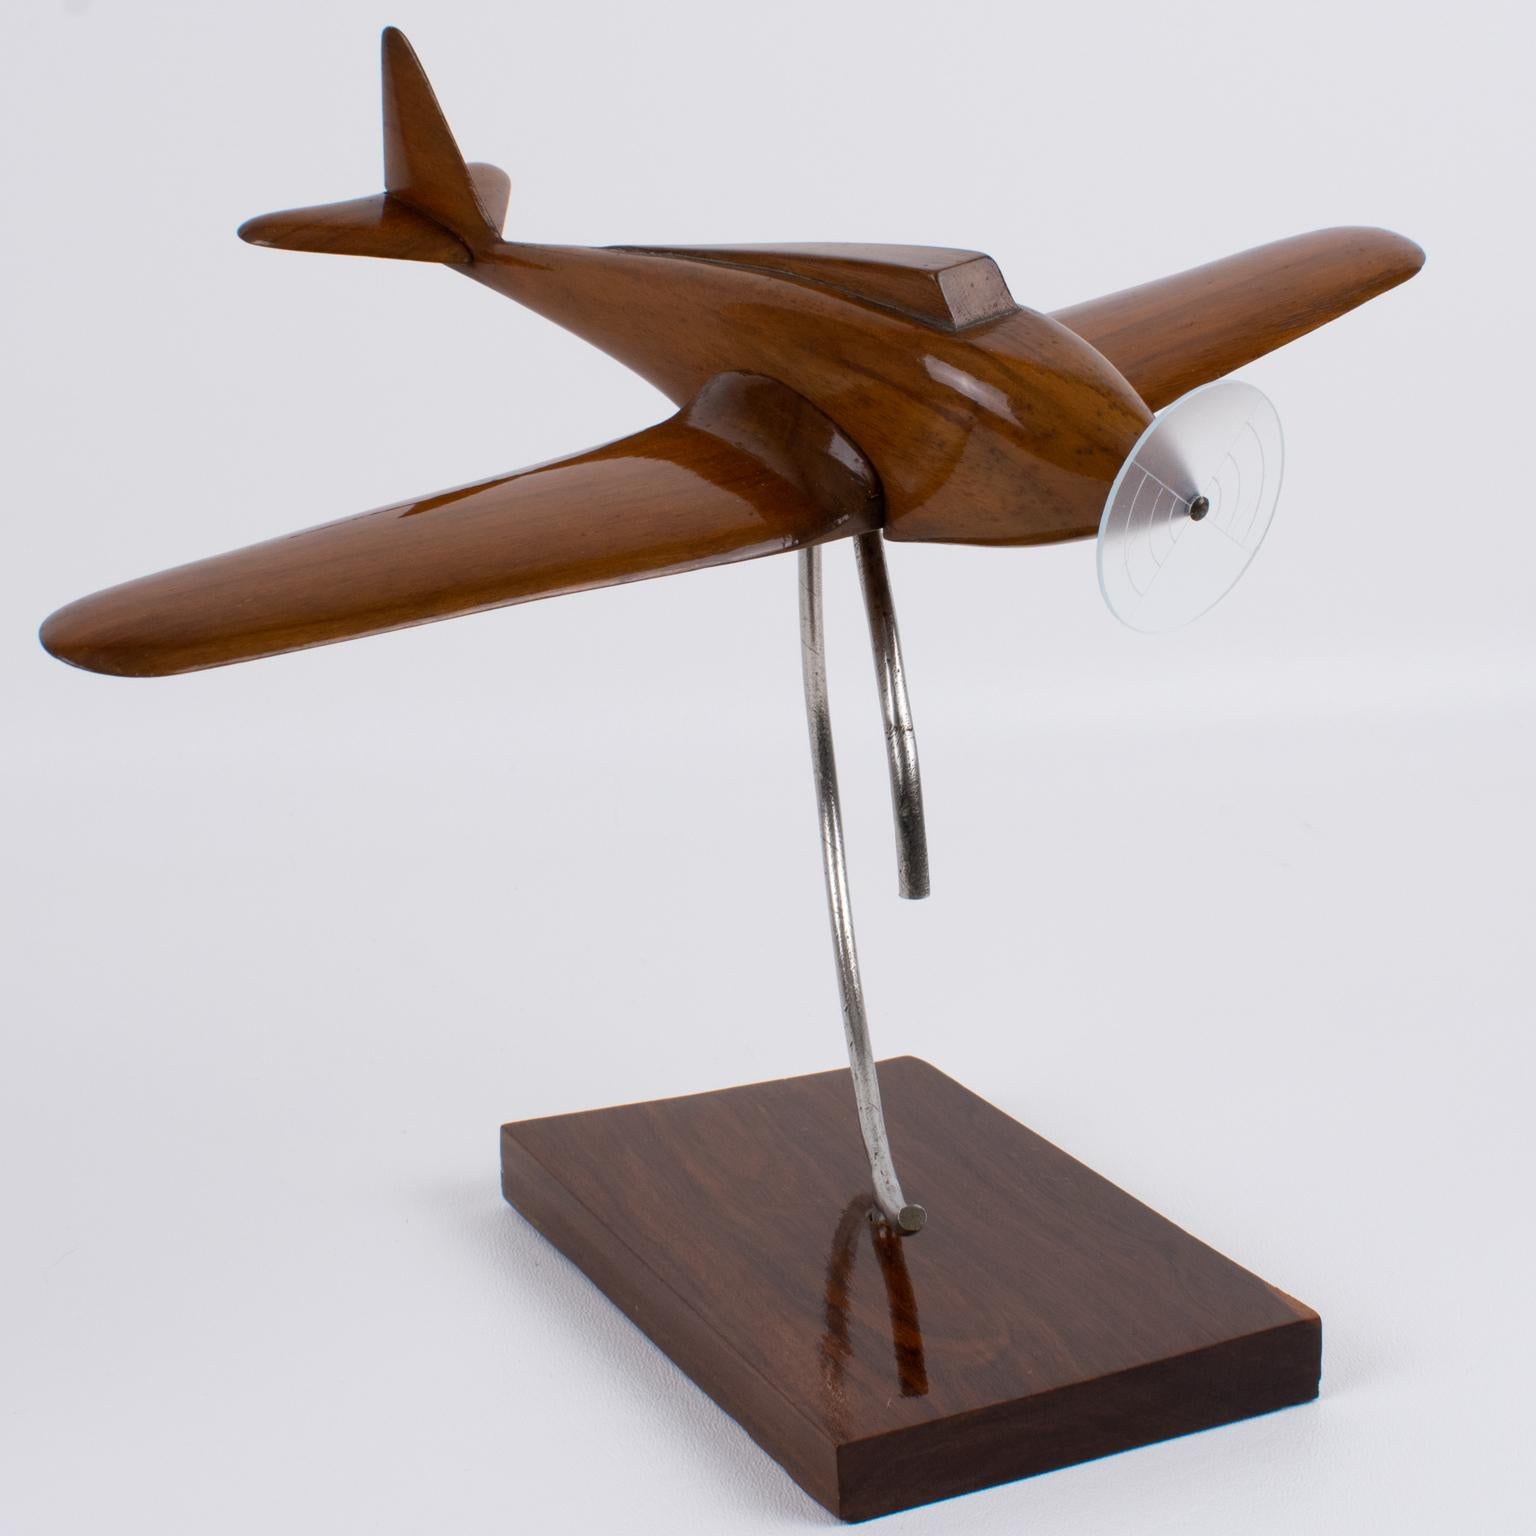 Art Deco Wood and Metal Airplane Aviation Propeller Model, France 1930s For Sale 8